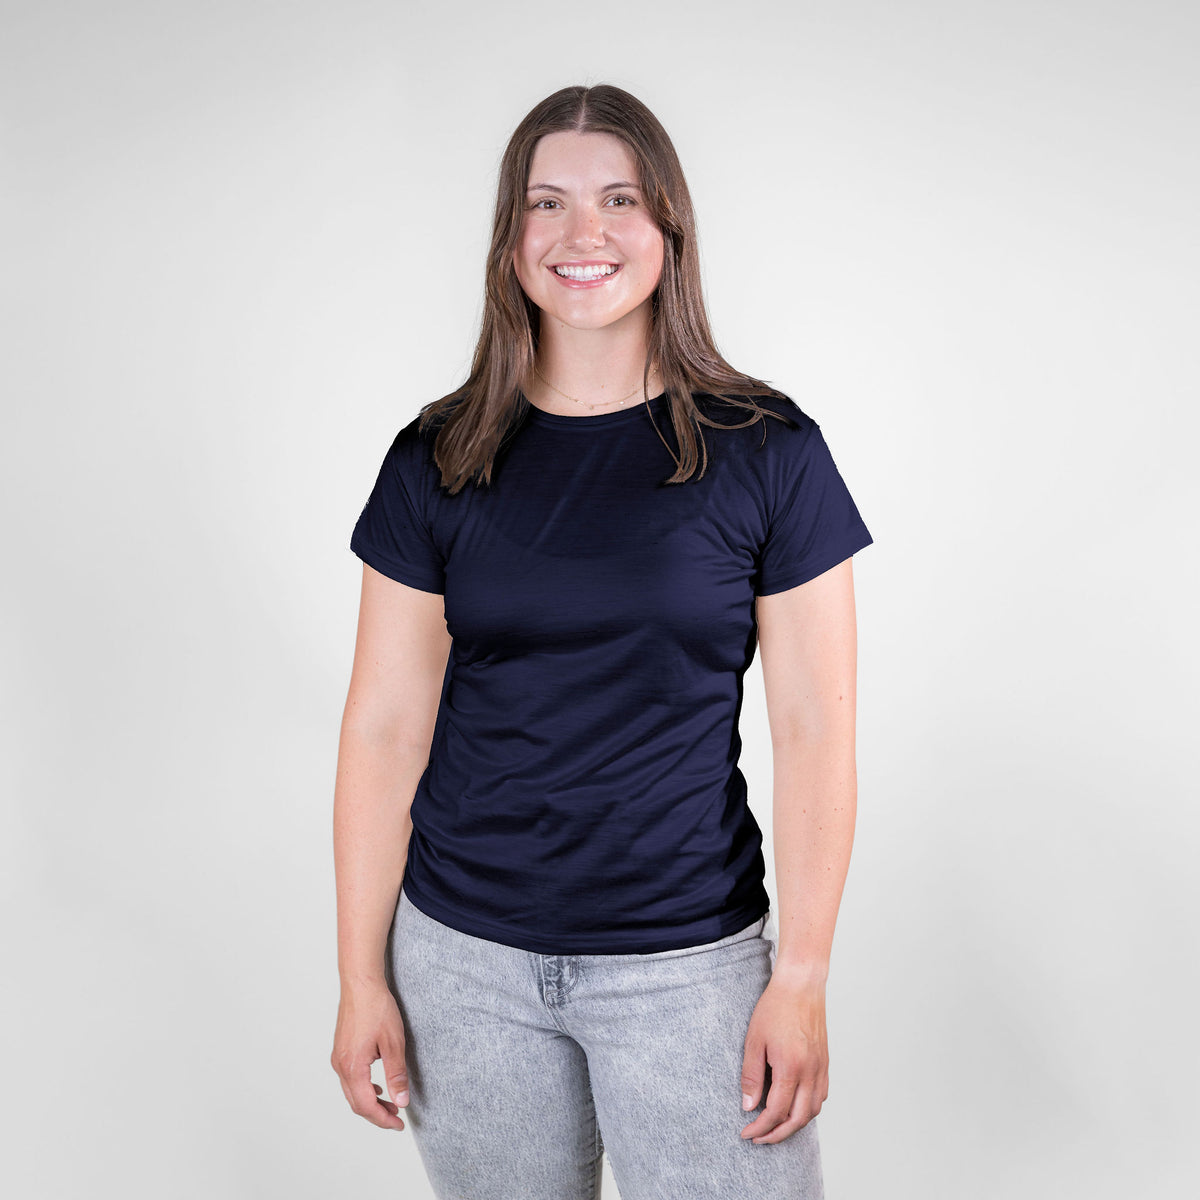 A smiling brown haired woman standing against a white background. She is wearing gray jeans and a navy blue Alpacas of Montana lightweight athletic activewear outerwear breathable moisture wicking antimicrobial soft comfortable exercise short sleeve alpaca women&#39;s performance tee for running sports exercise work out hiking climbing camping skiing biking